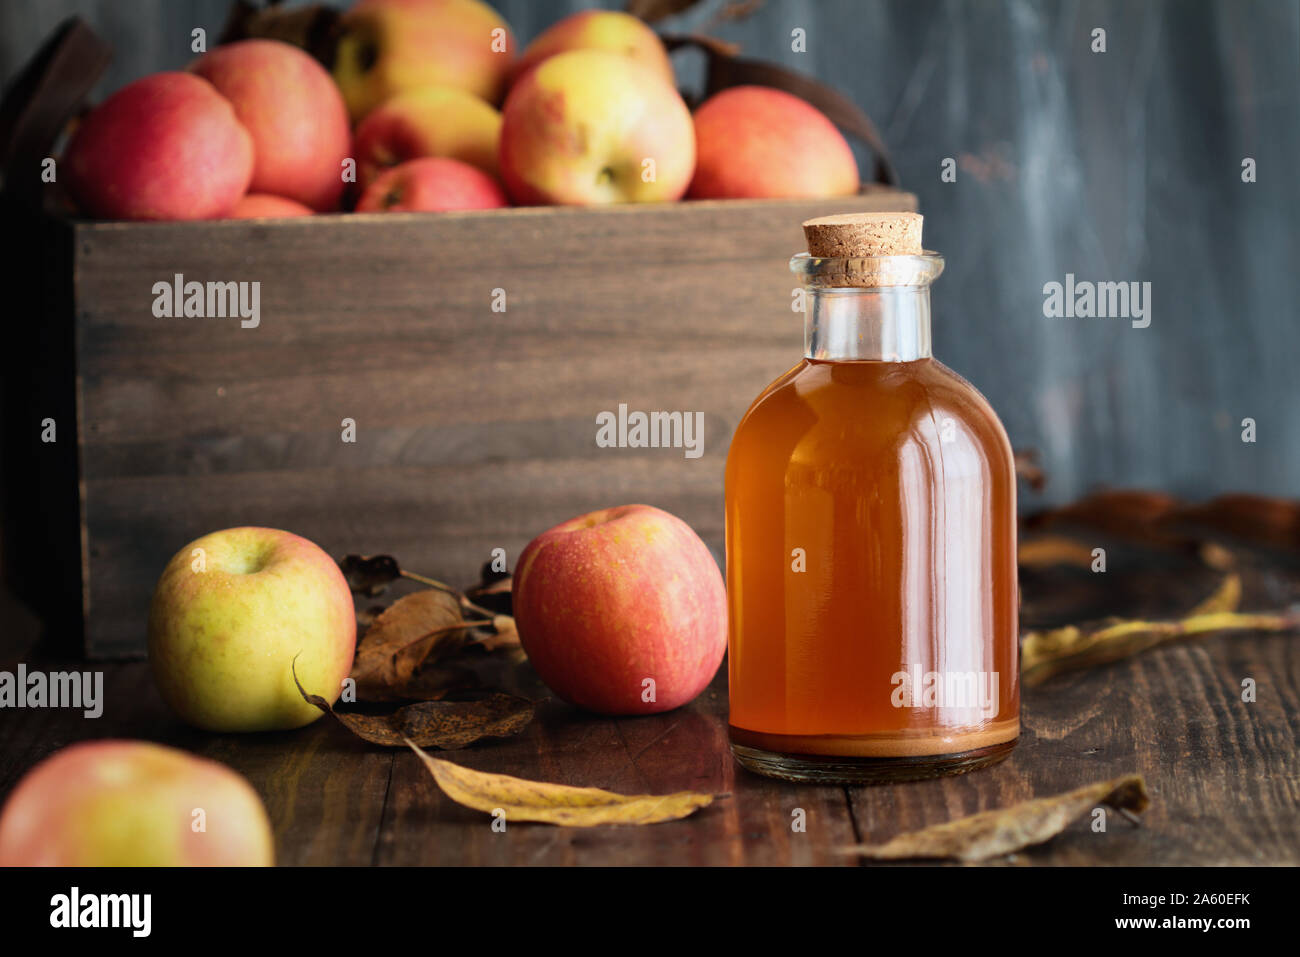 Apple cider vinegar with the mother, yeast and healthy bacteria, surrounded by fresh apples. Apple cider vinegar has long been used in naturopathy to Stock Photo